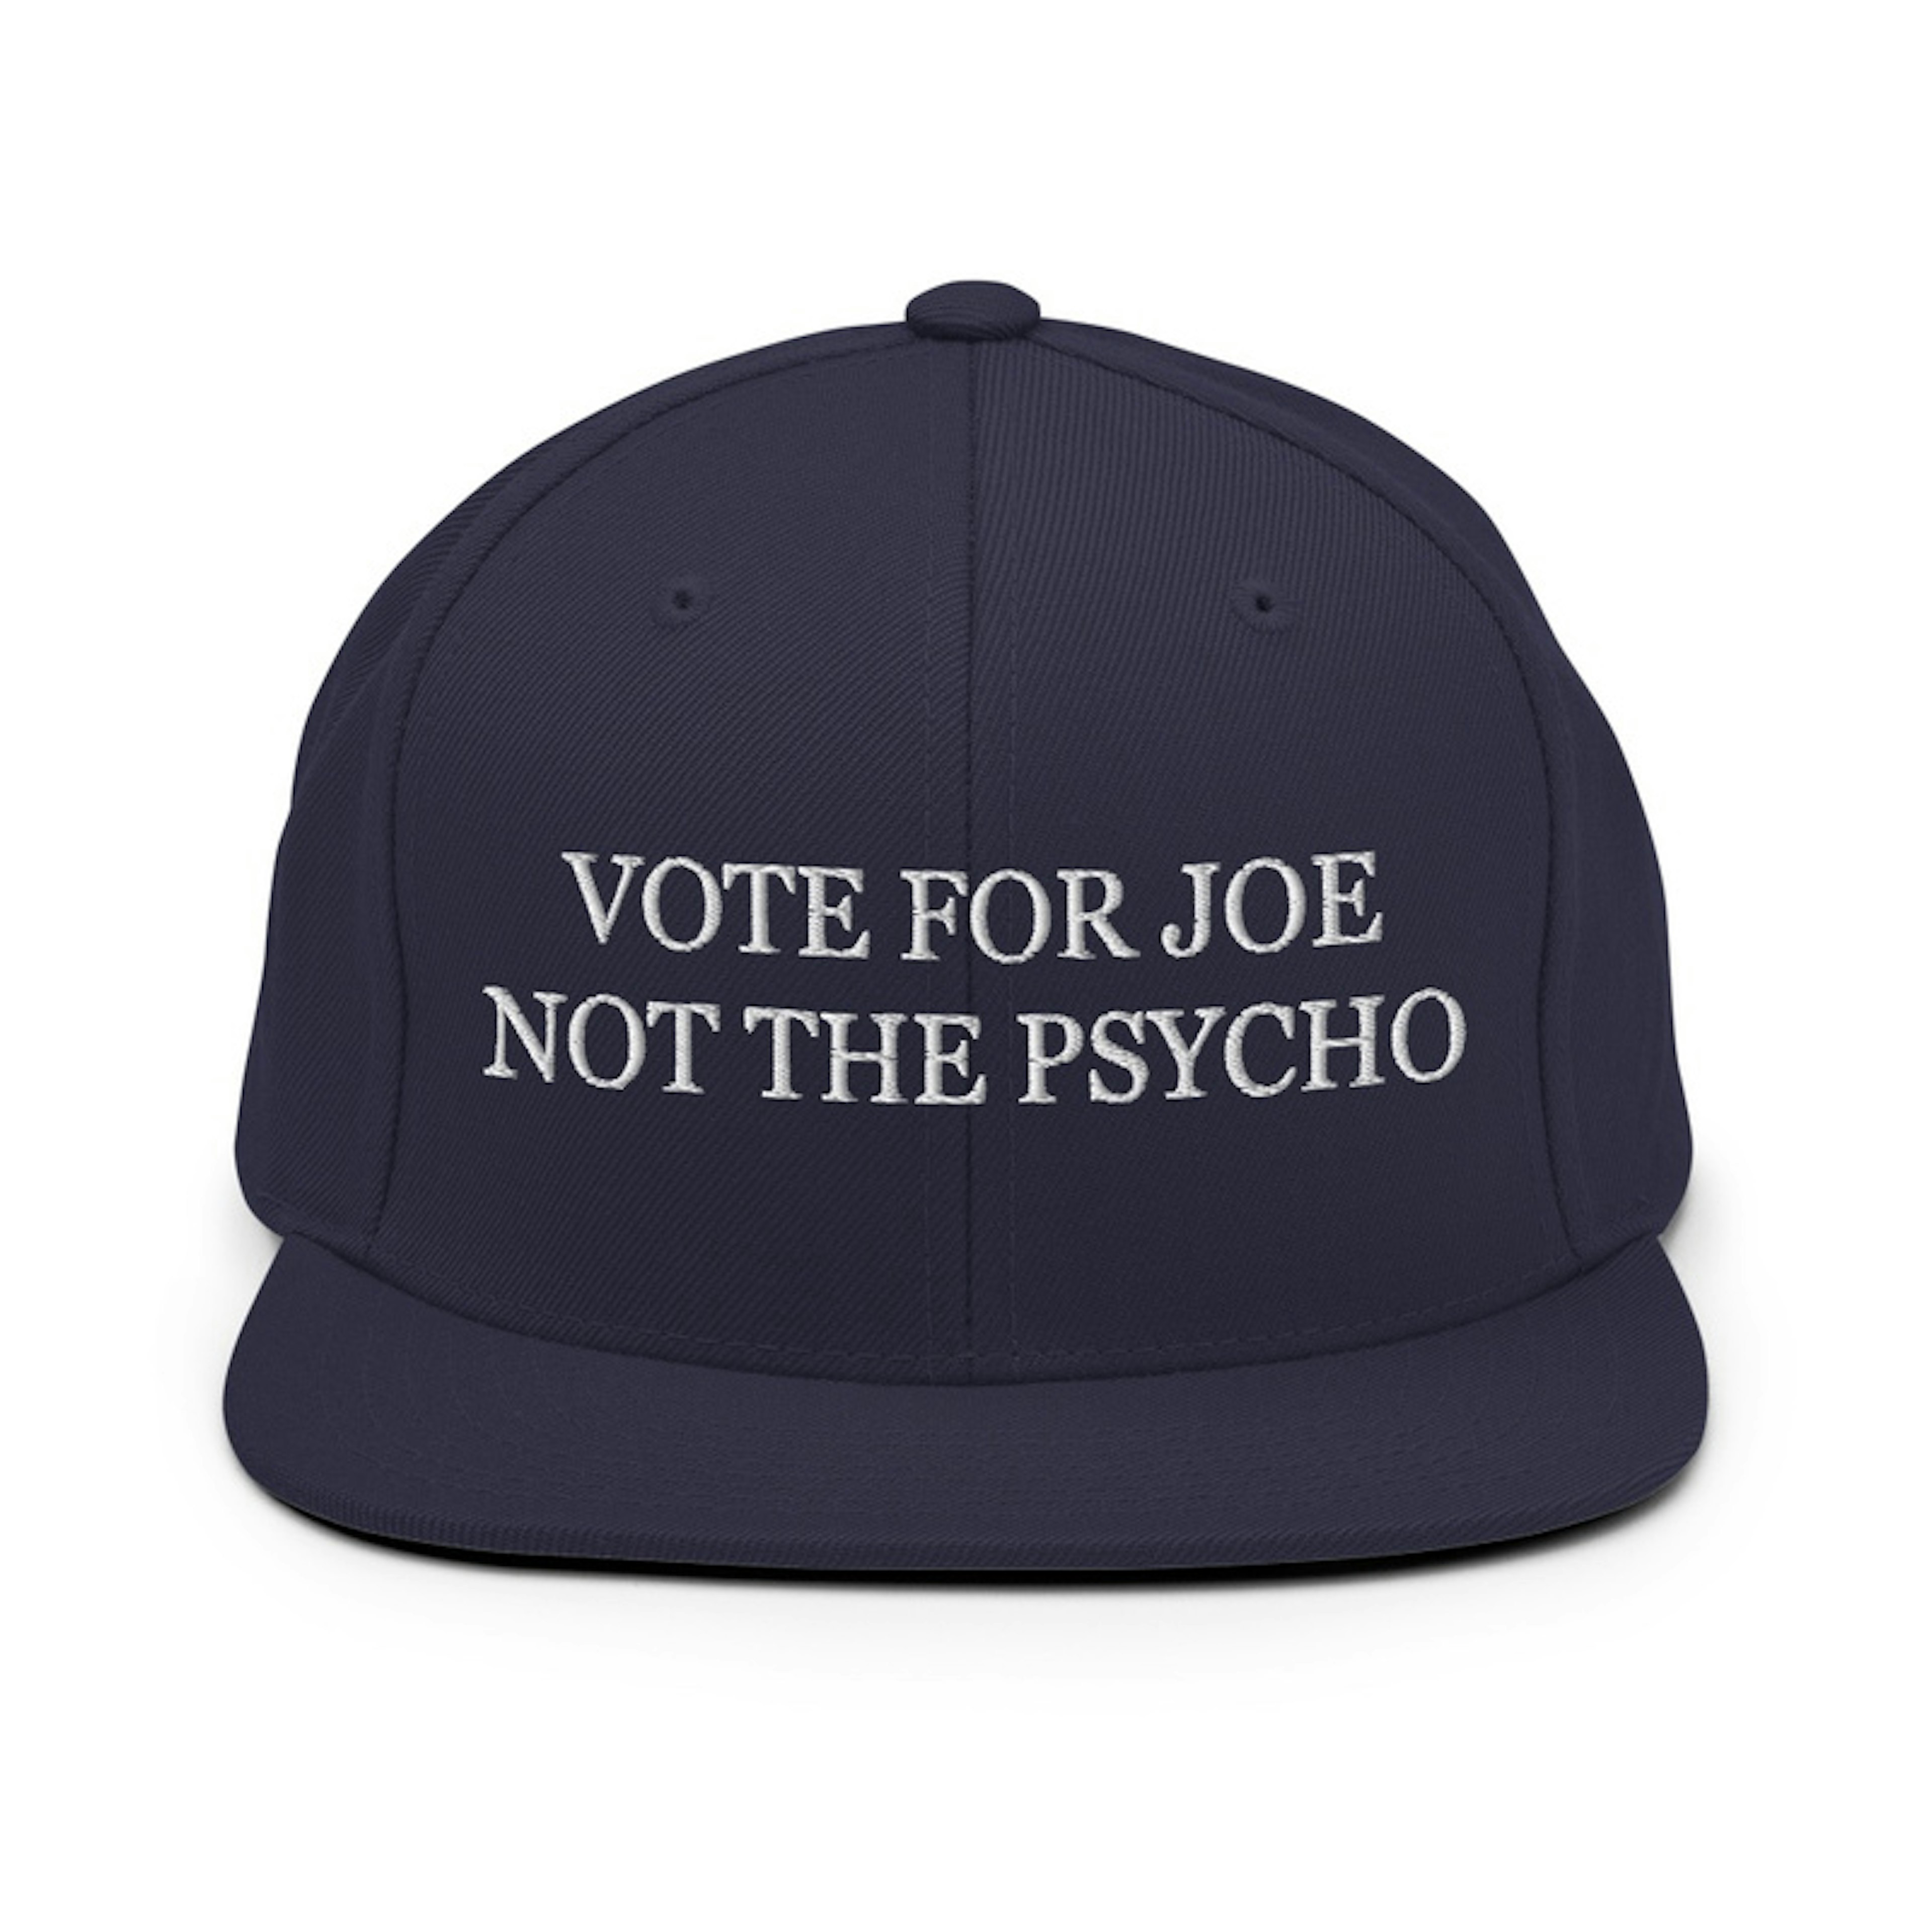 "Vote for Joe, Not the Psycho" Hat